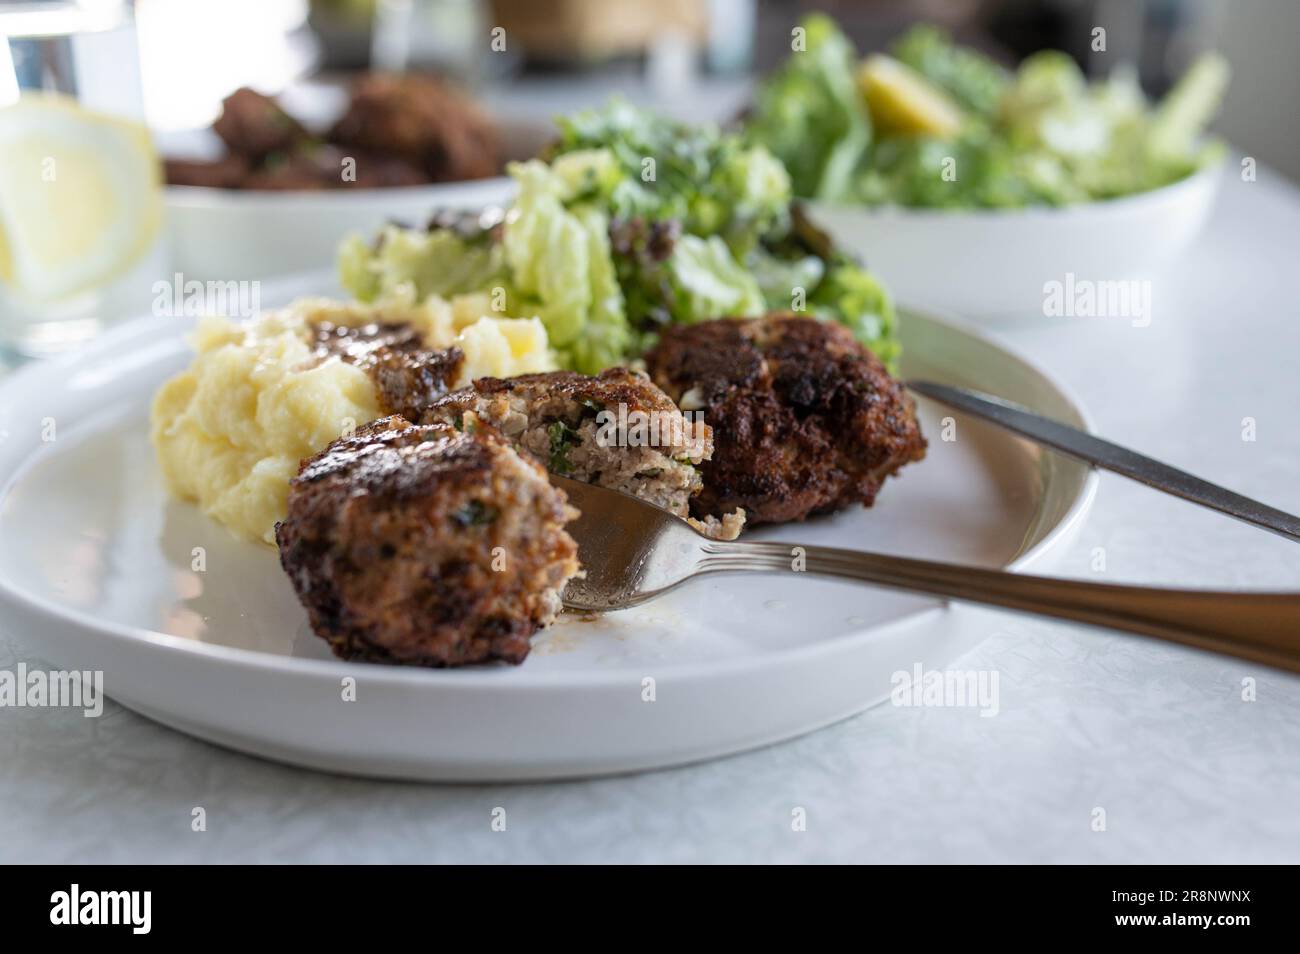 German meatballs with mashed potatoes and salad on a dinner table Stock Photo